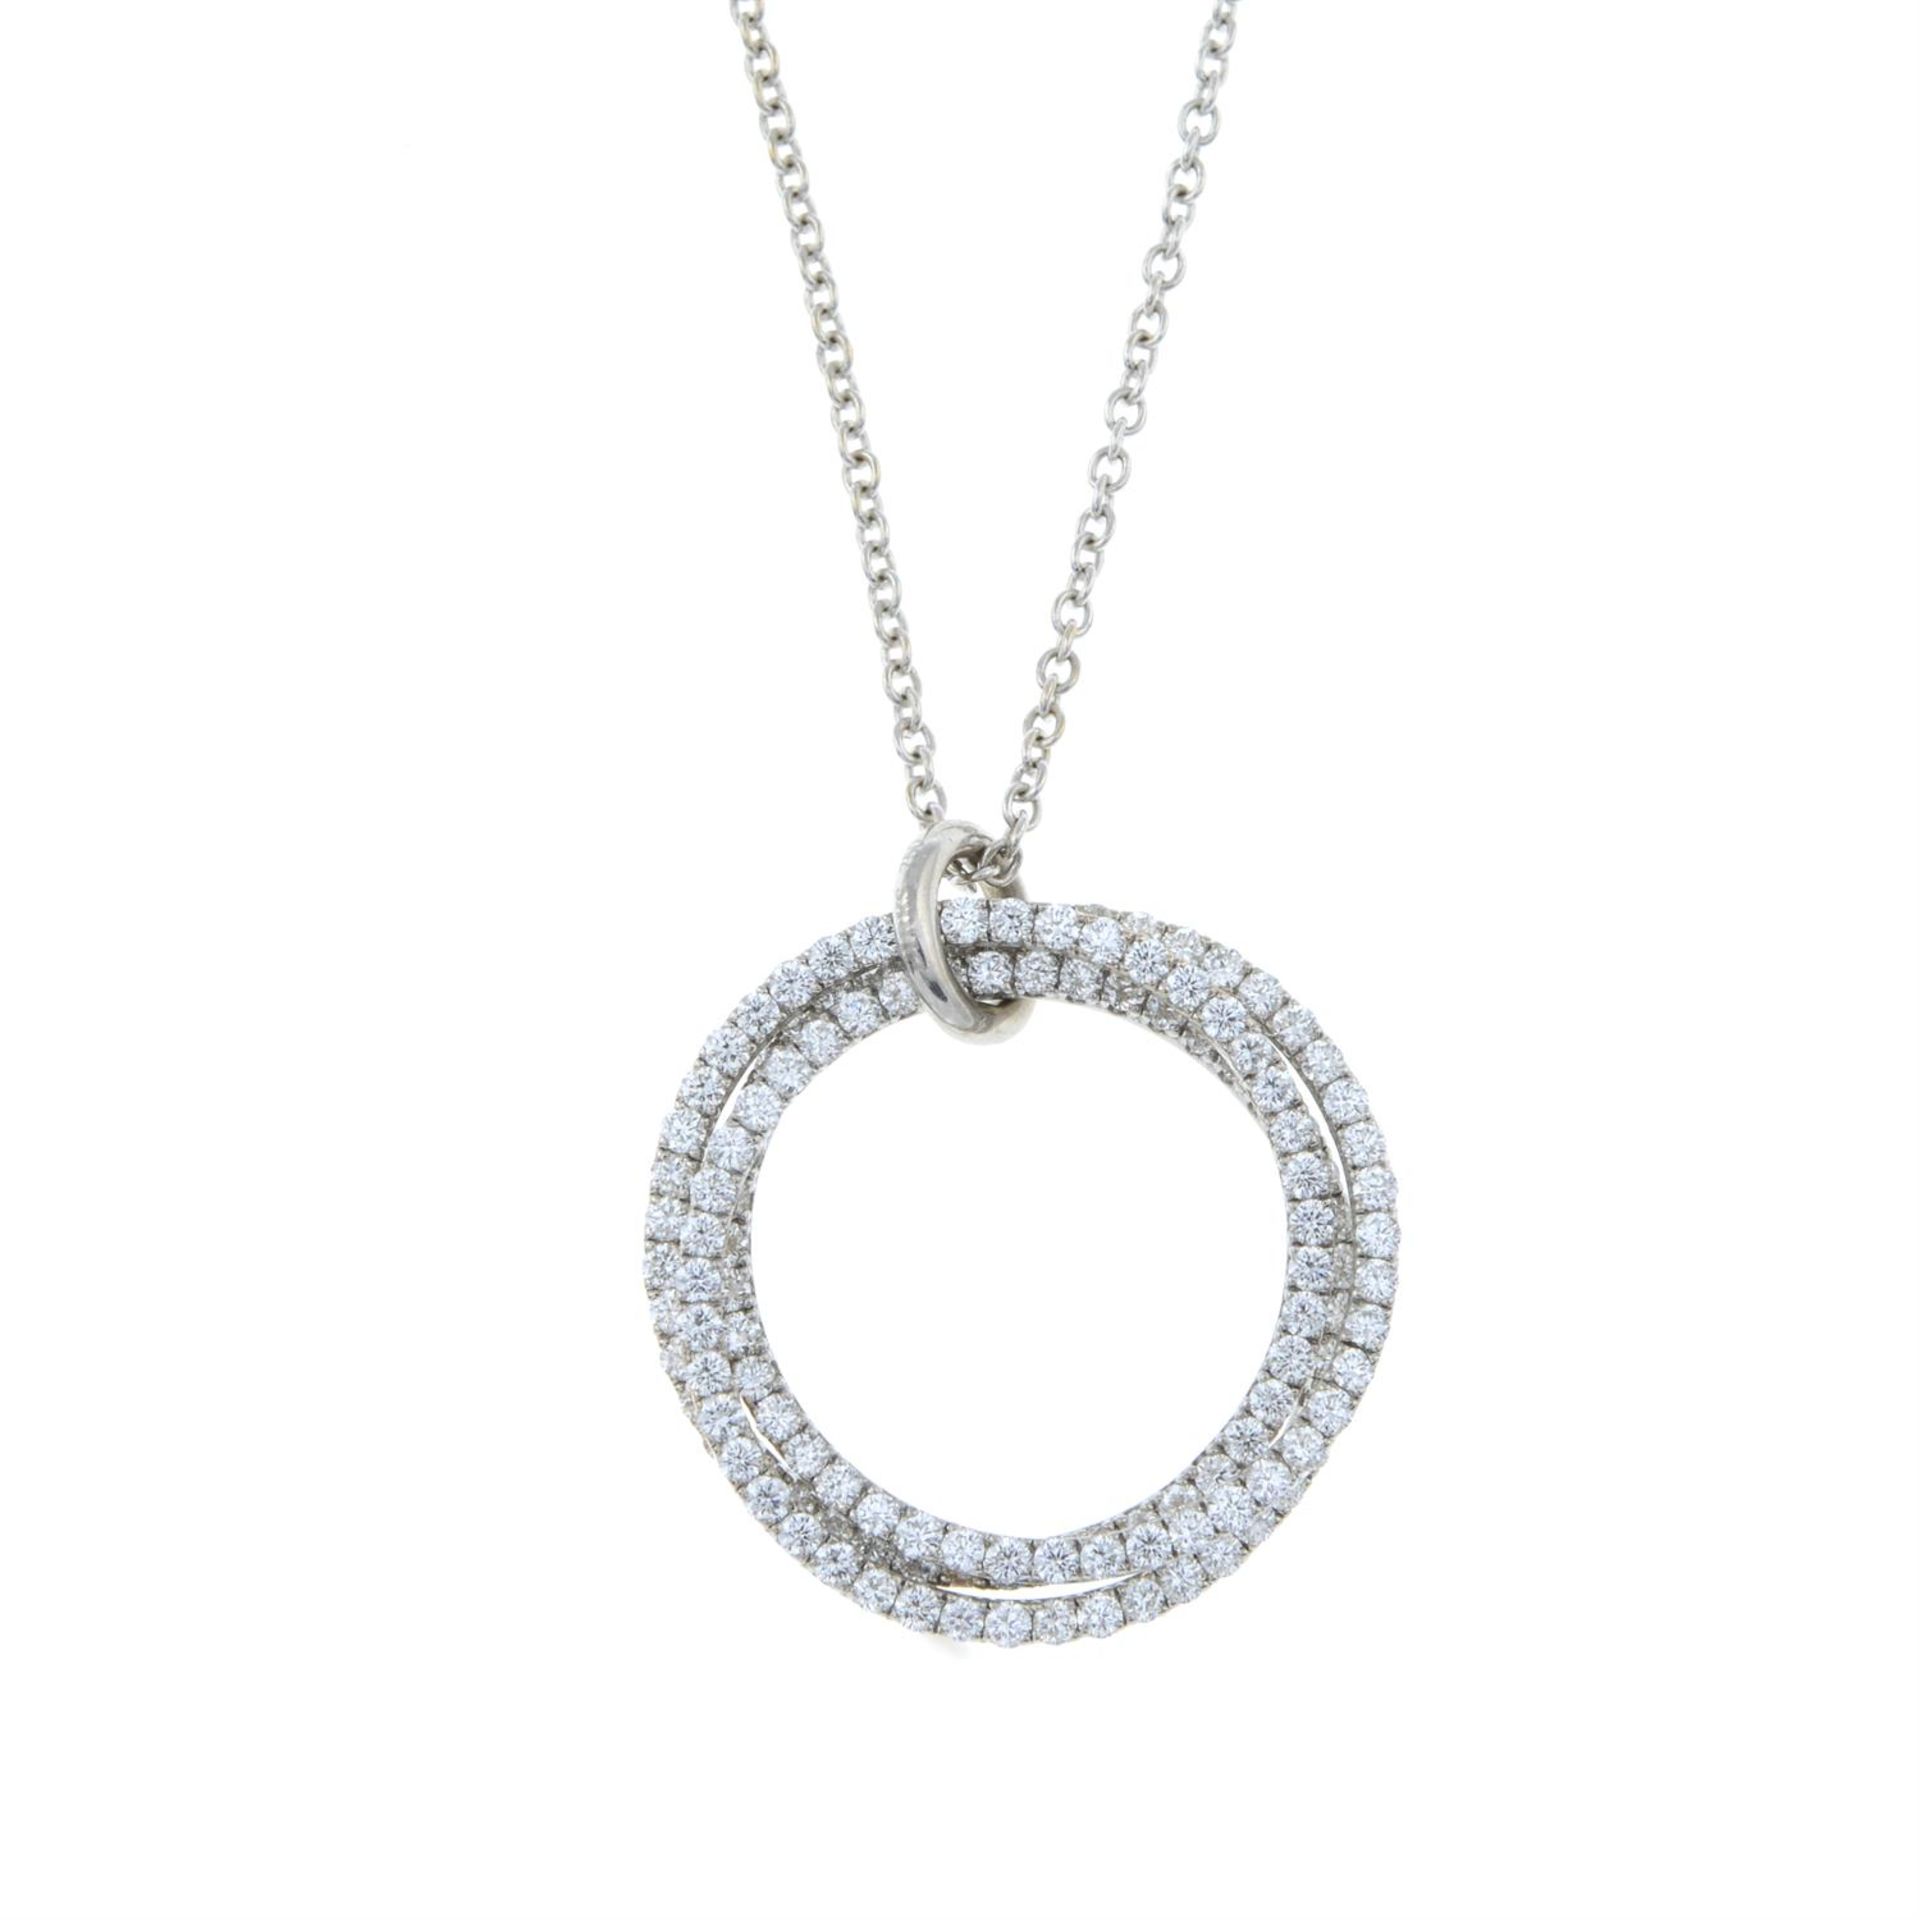 A brilliant-cut diamond 'Entwined Circles' pendant, on chain, by Birks.